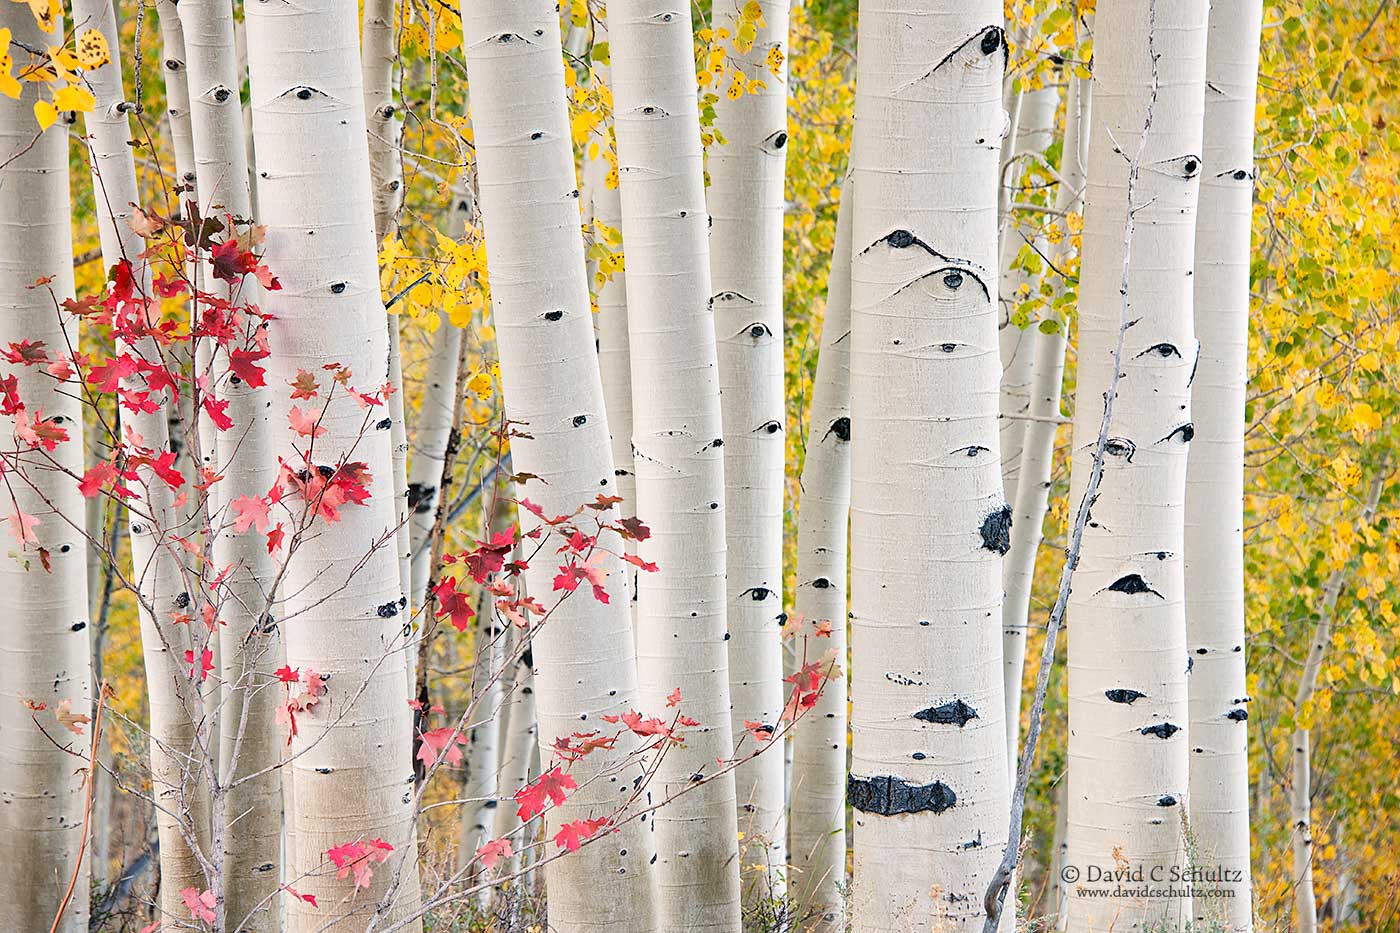 Fall aspen  in the Wasatch Mountains of Utah - Image #3-7456